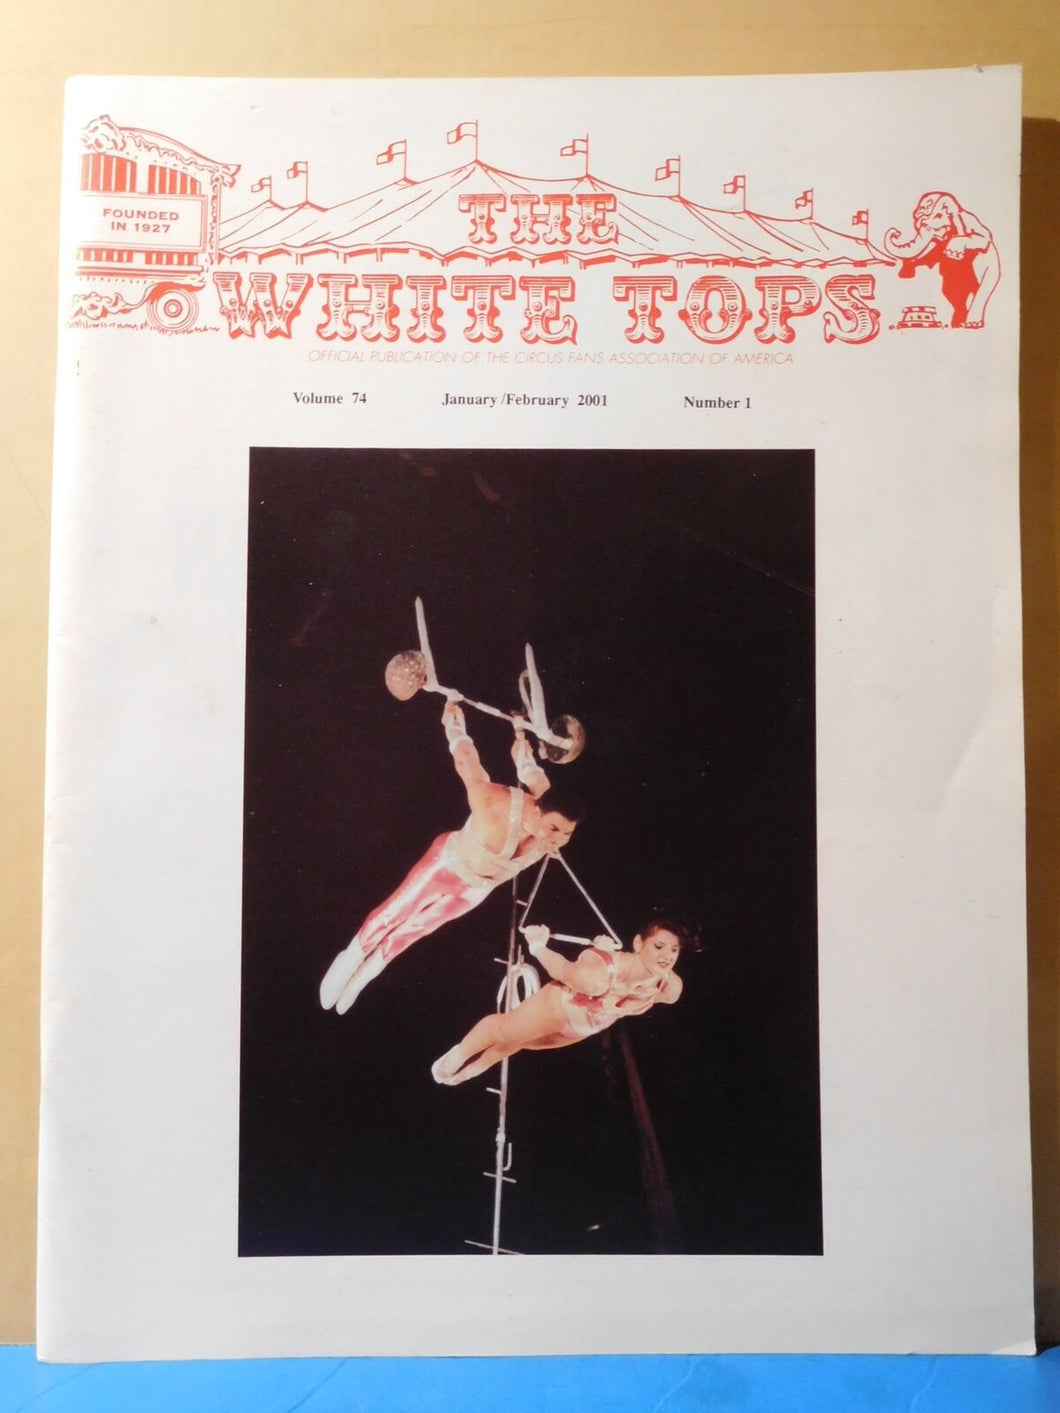 White Tops Circus Magazine 2001 January February Circus Time in the City